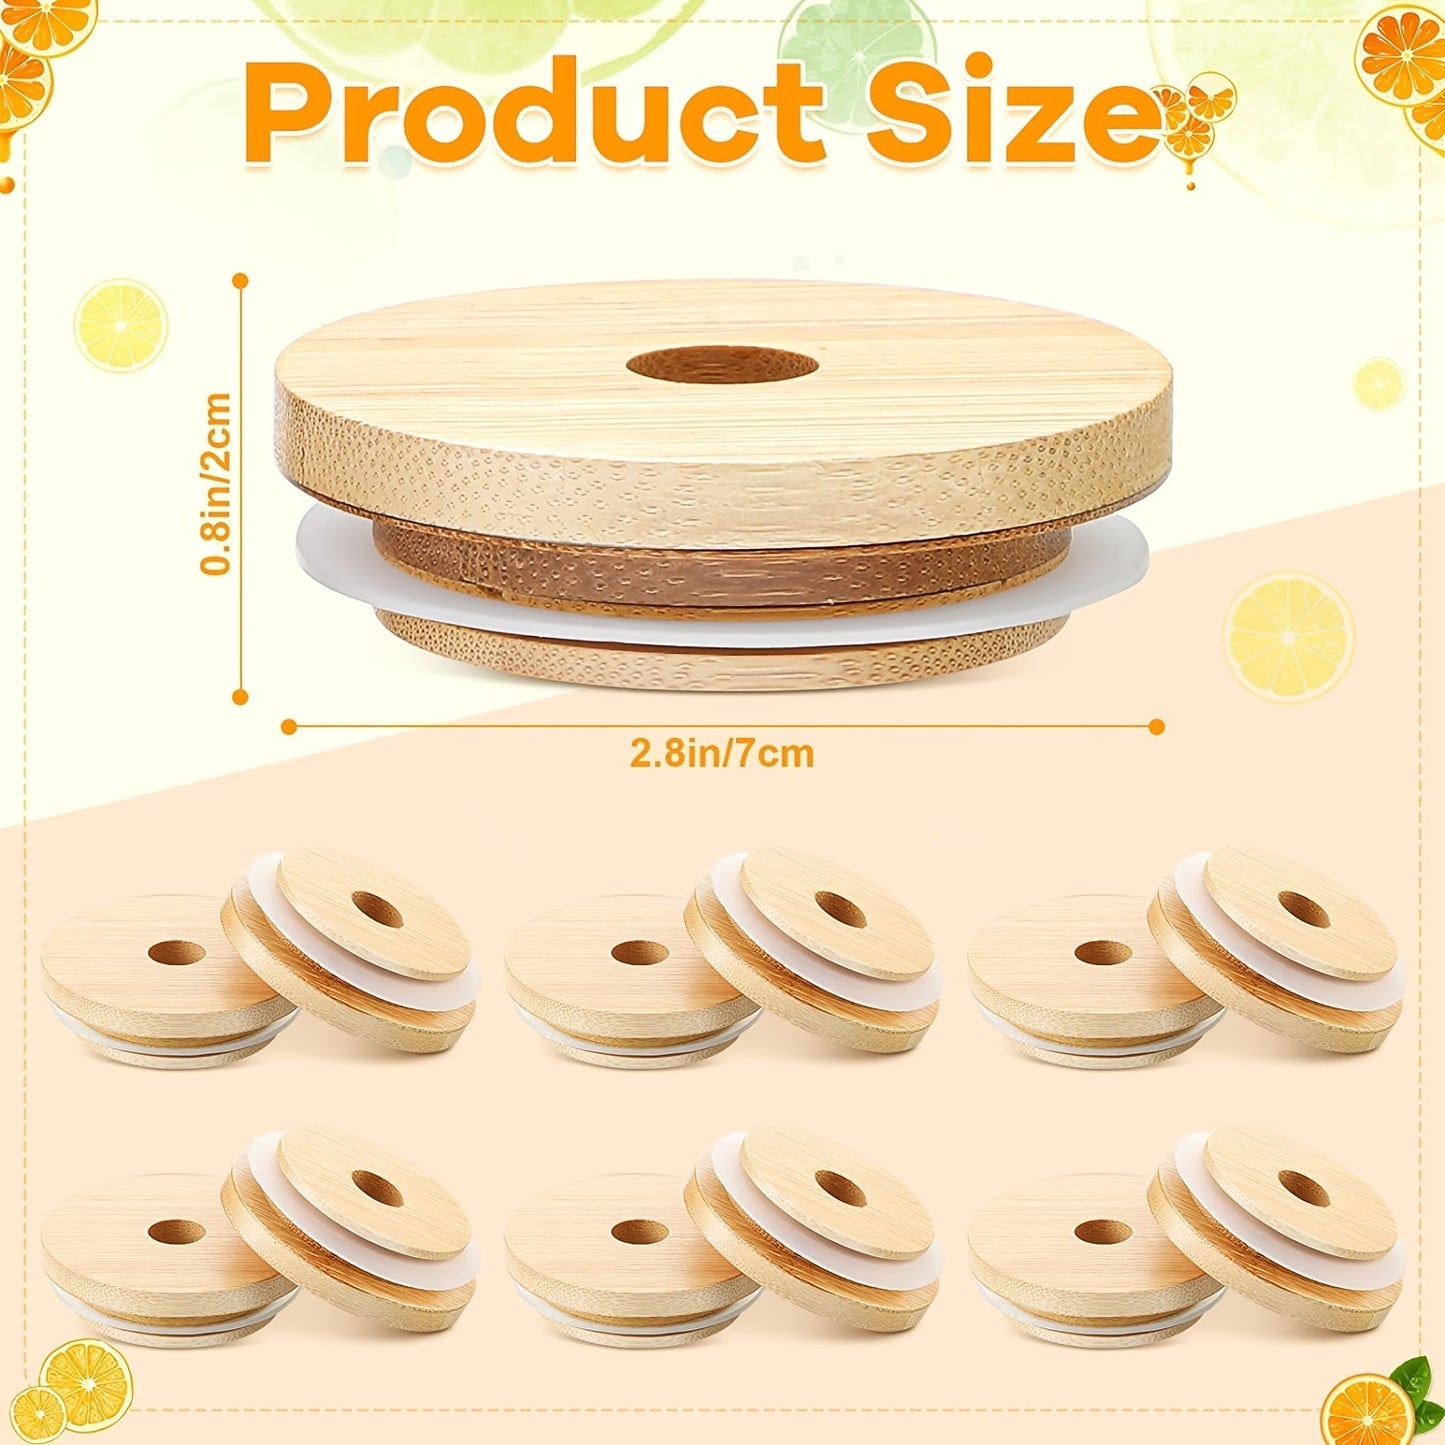 2/4pcs Bamboo Jar Lids With Straw Hole; Reusable Bamboo Jar Lids; Leak Proof Glass Canning Drinking Storage Jars; Canning Lids With Silicone Ring For Mason Canning Jar